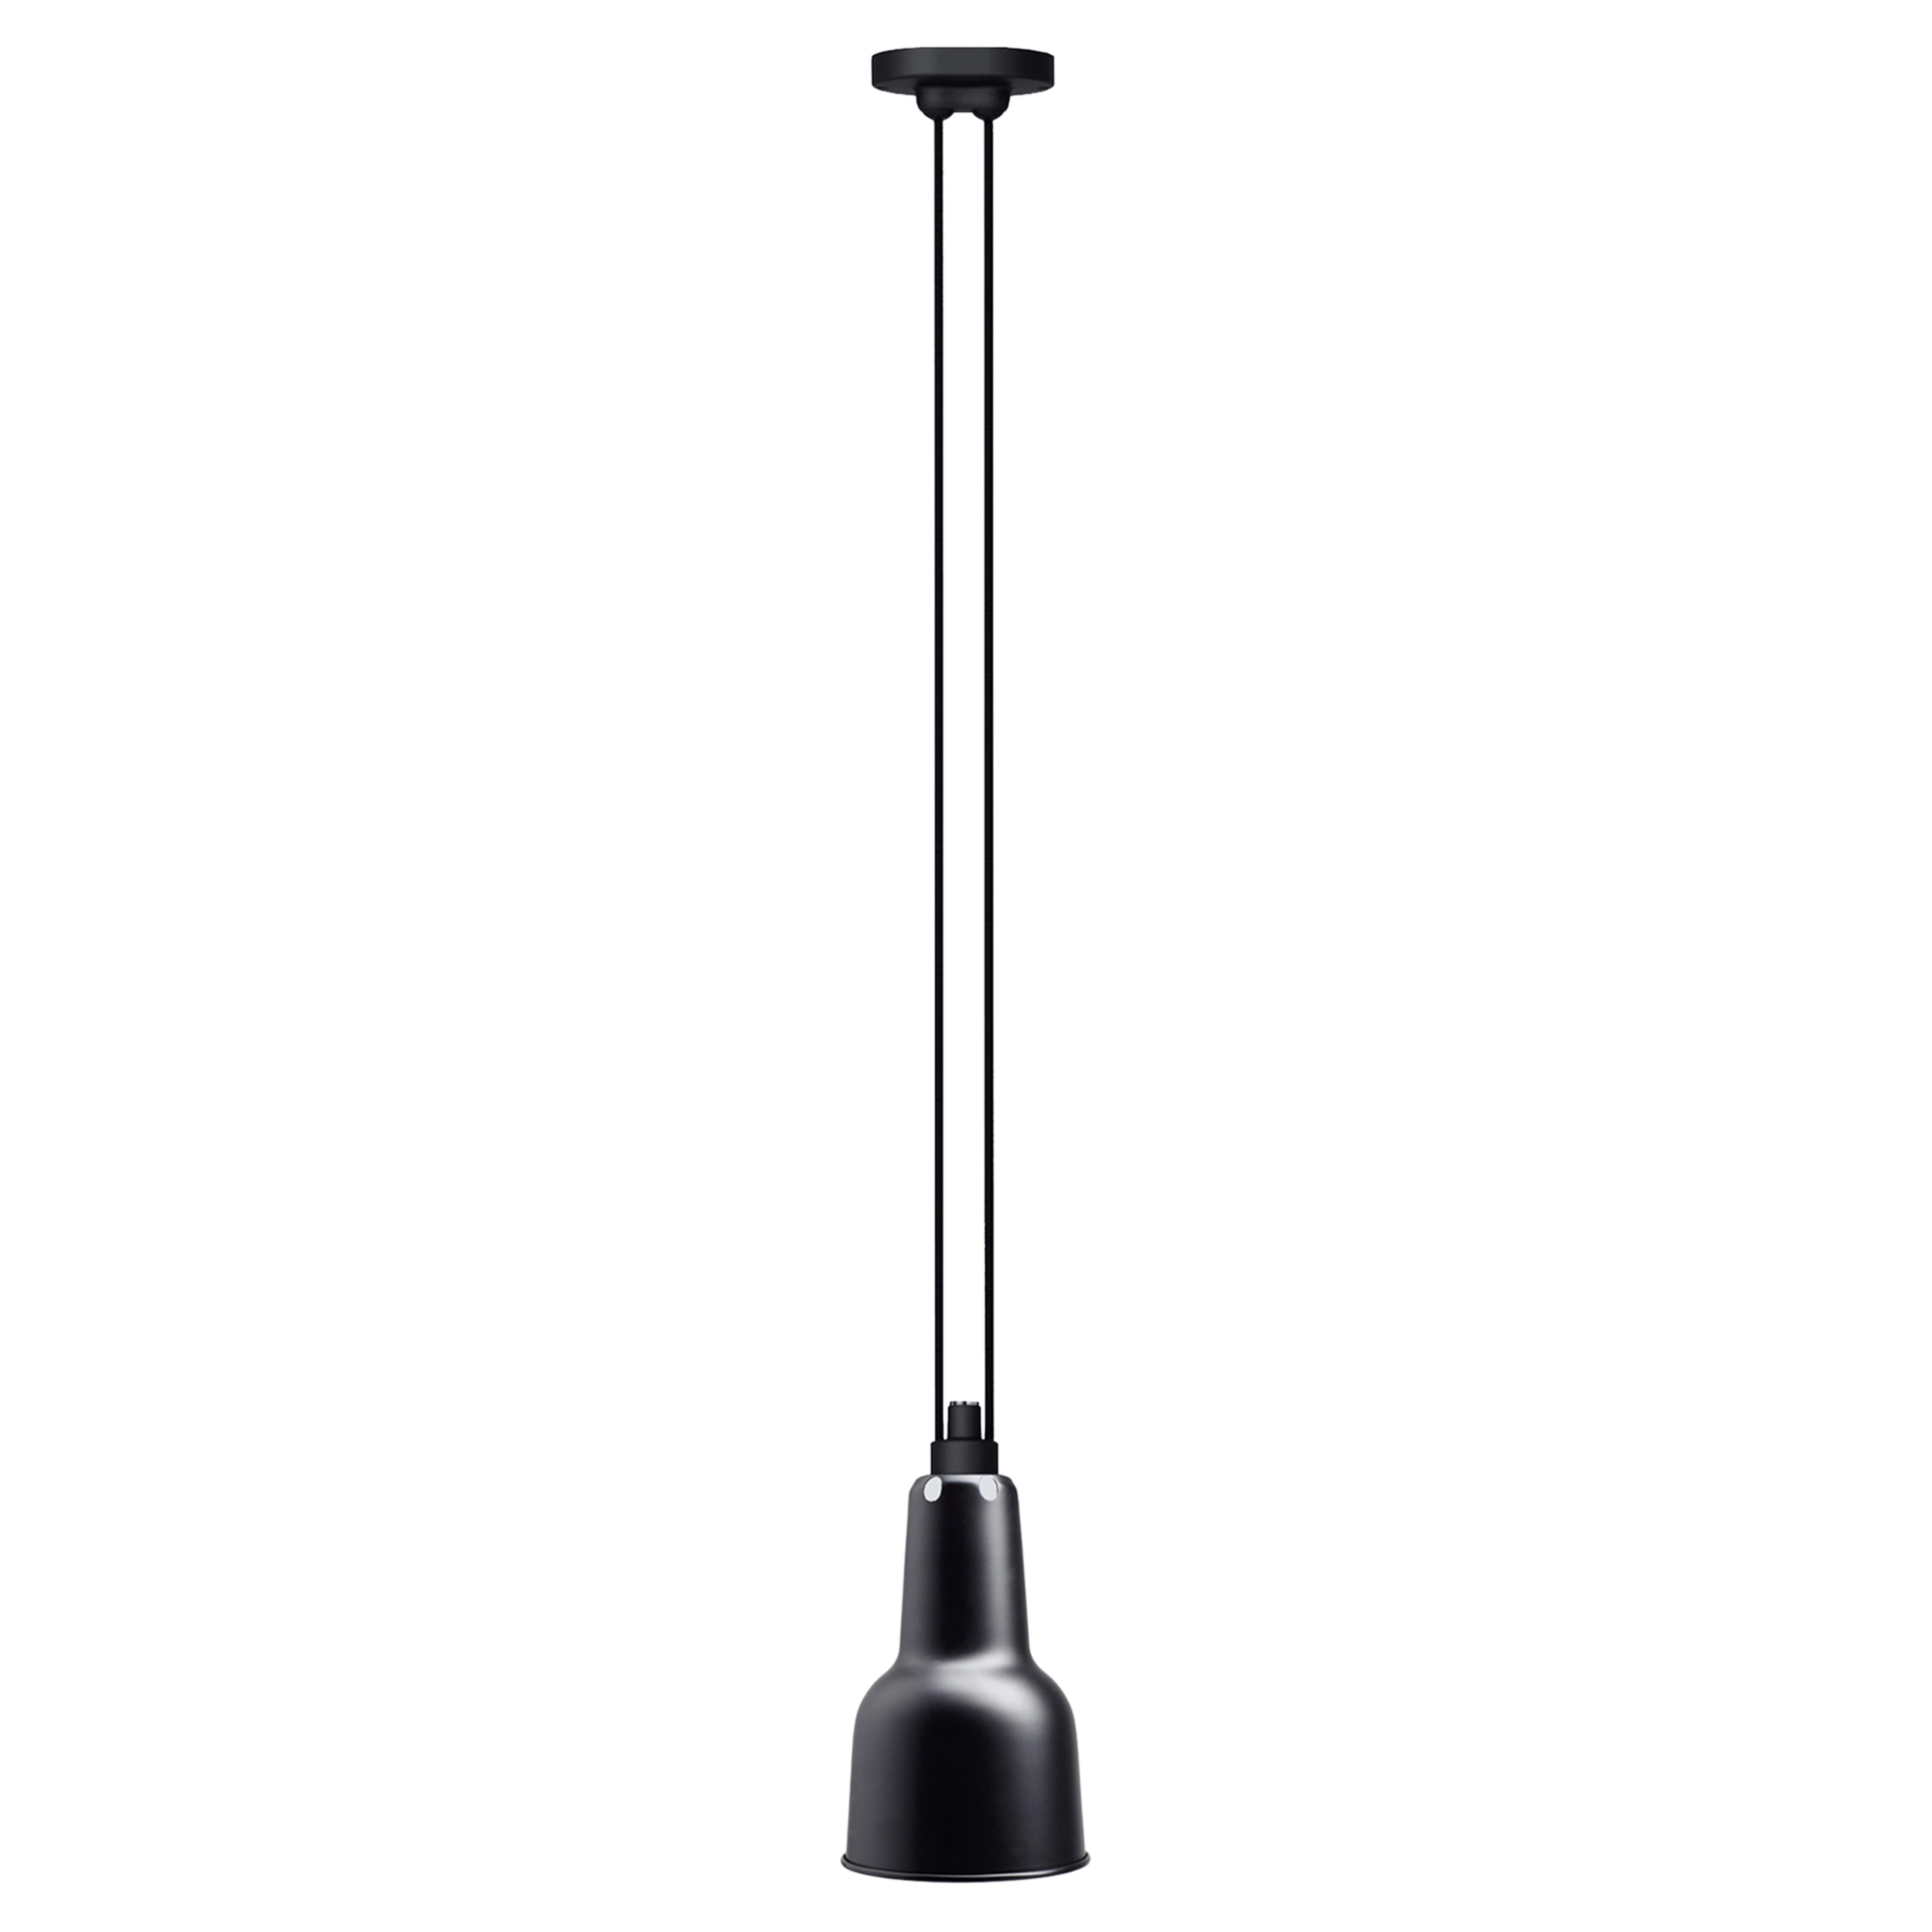 DCW Editions Les Acrobates N°322 Oculist Pendant Lamp in Black Shade